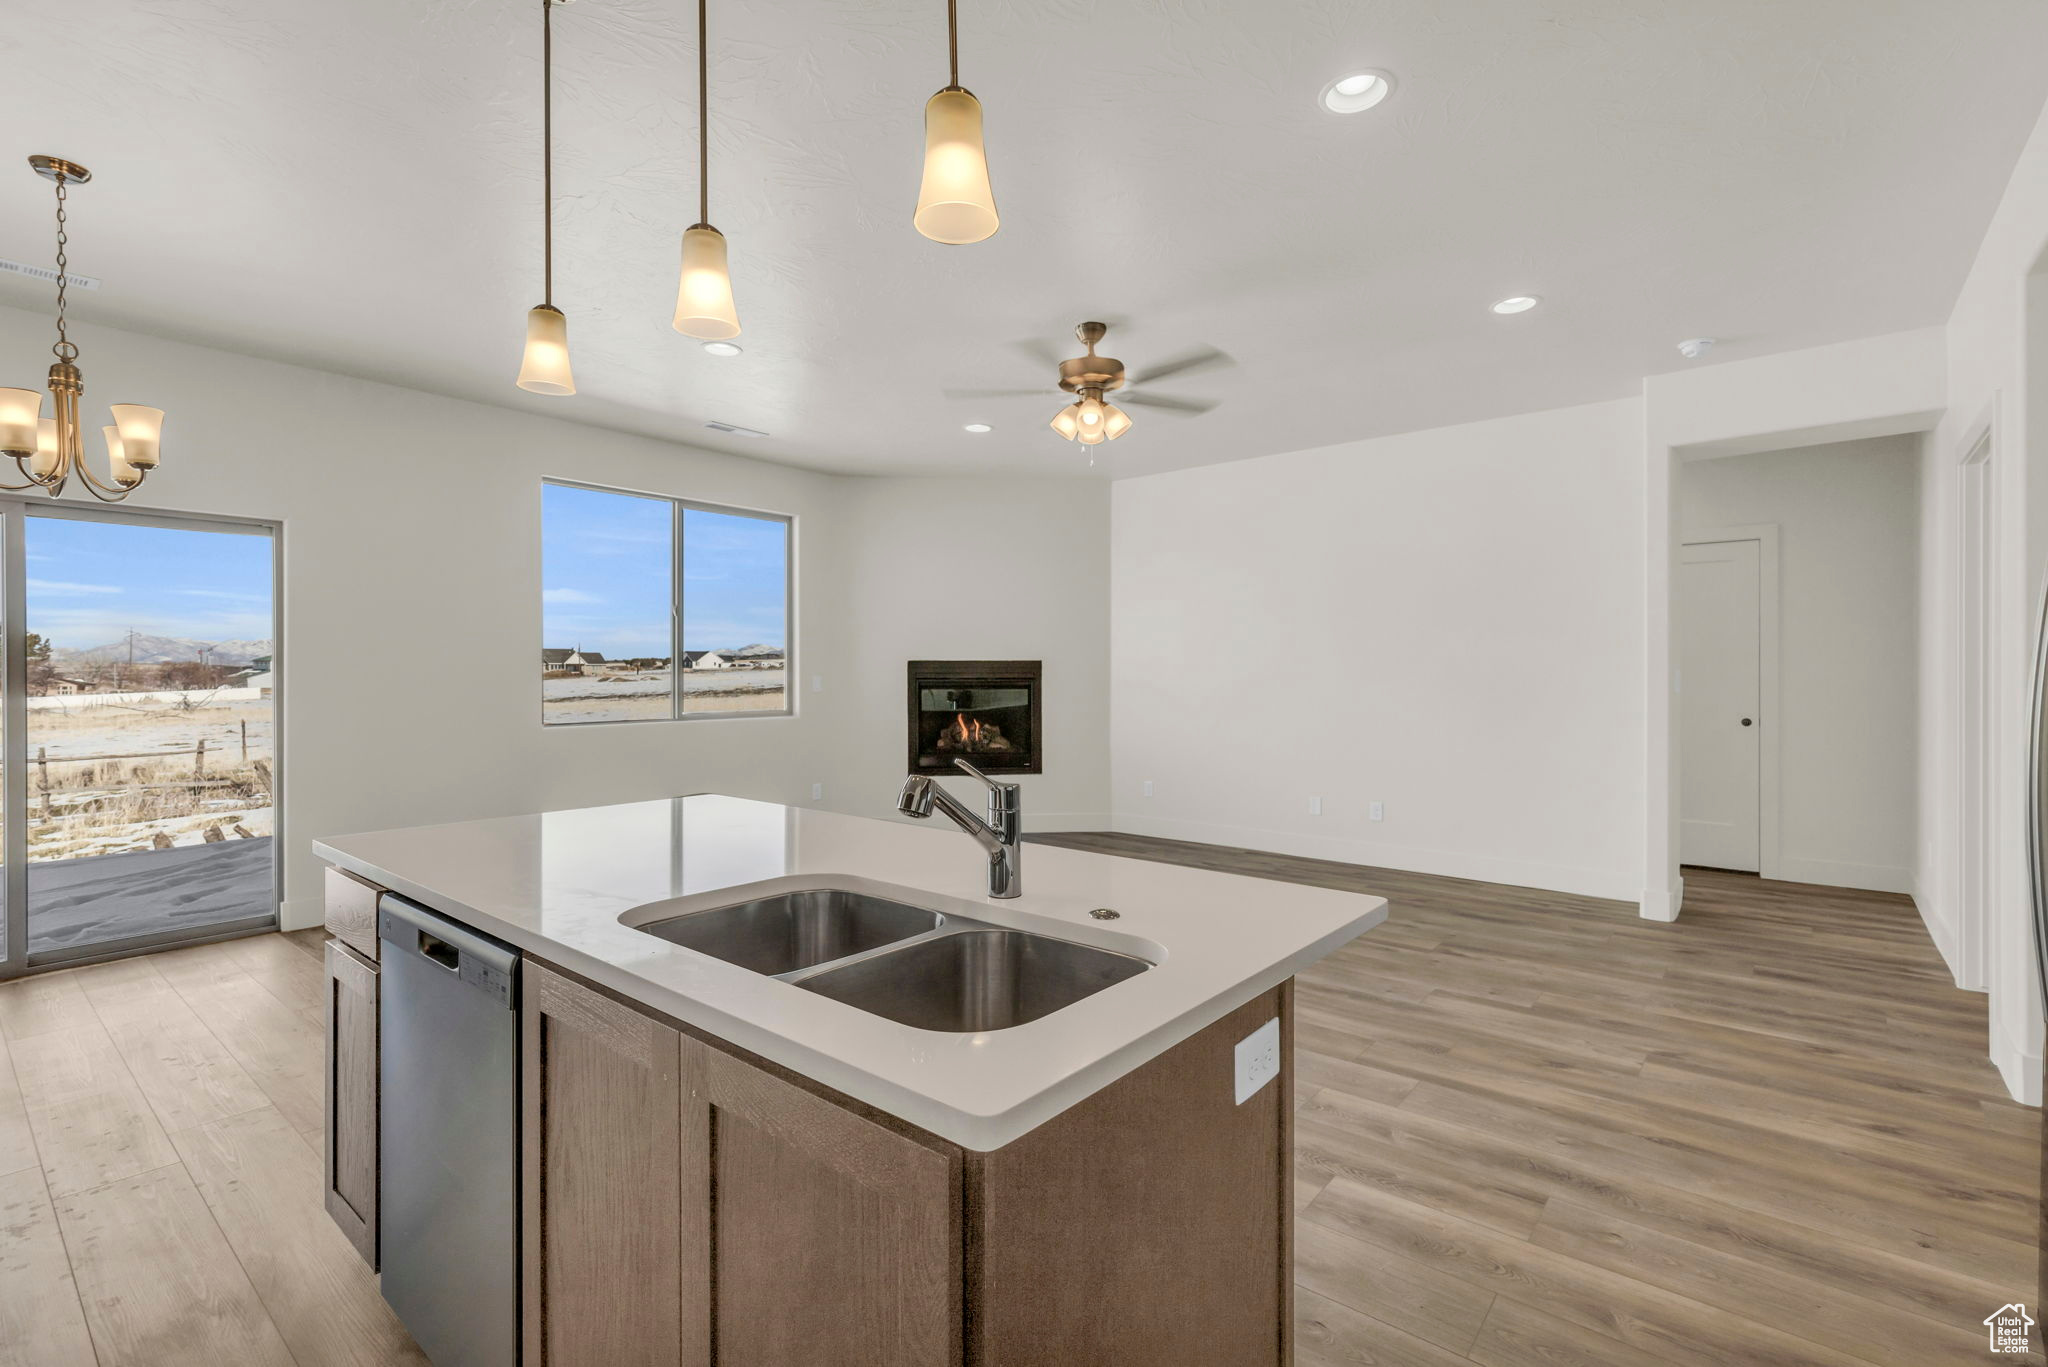 Kitchen with light hardwood / wood-style flooring, a kitchen island with sink, ceiling fan with notable chandelier, sink, and stainless steel dishwasher